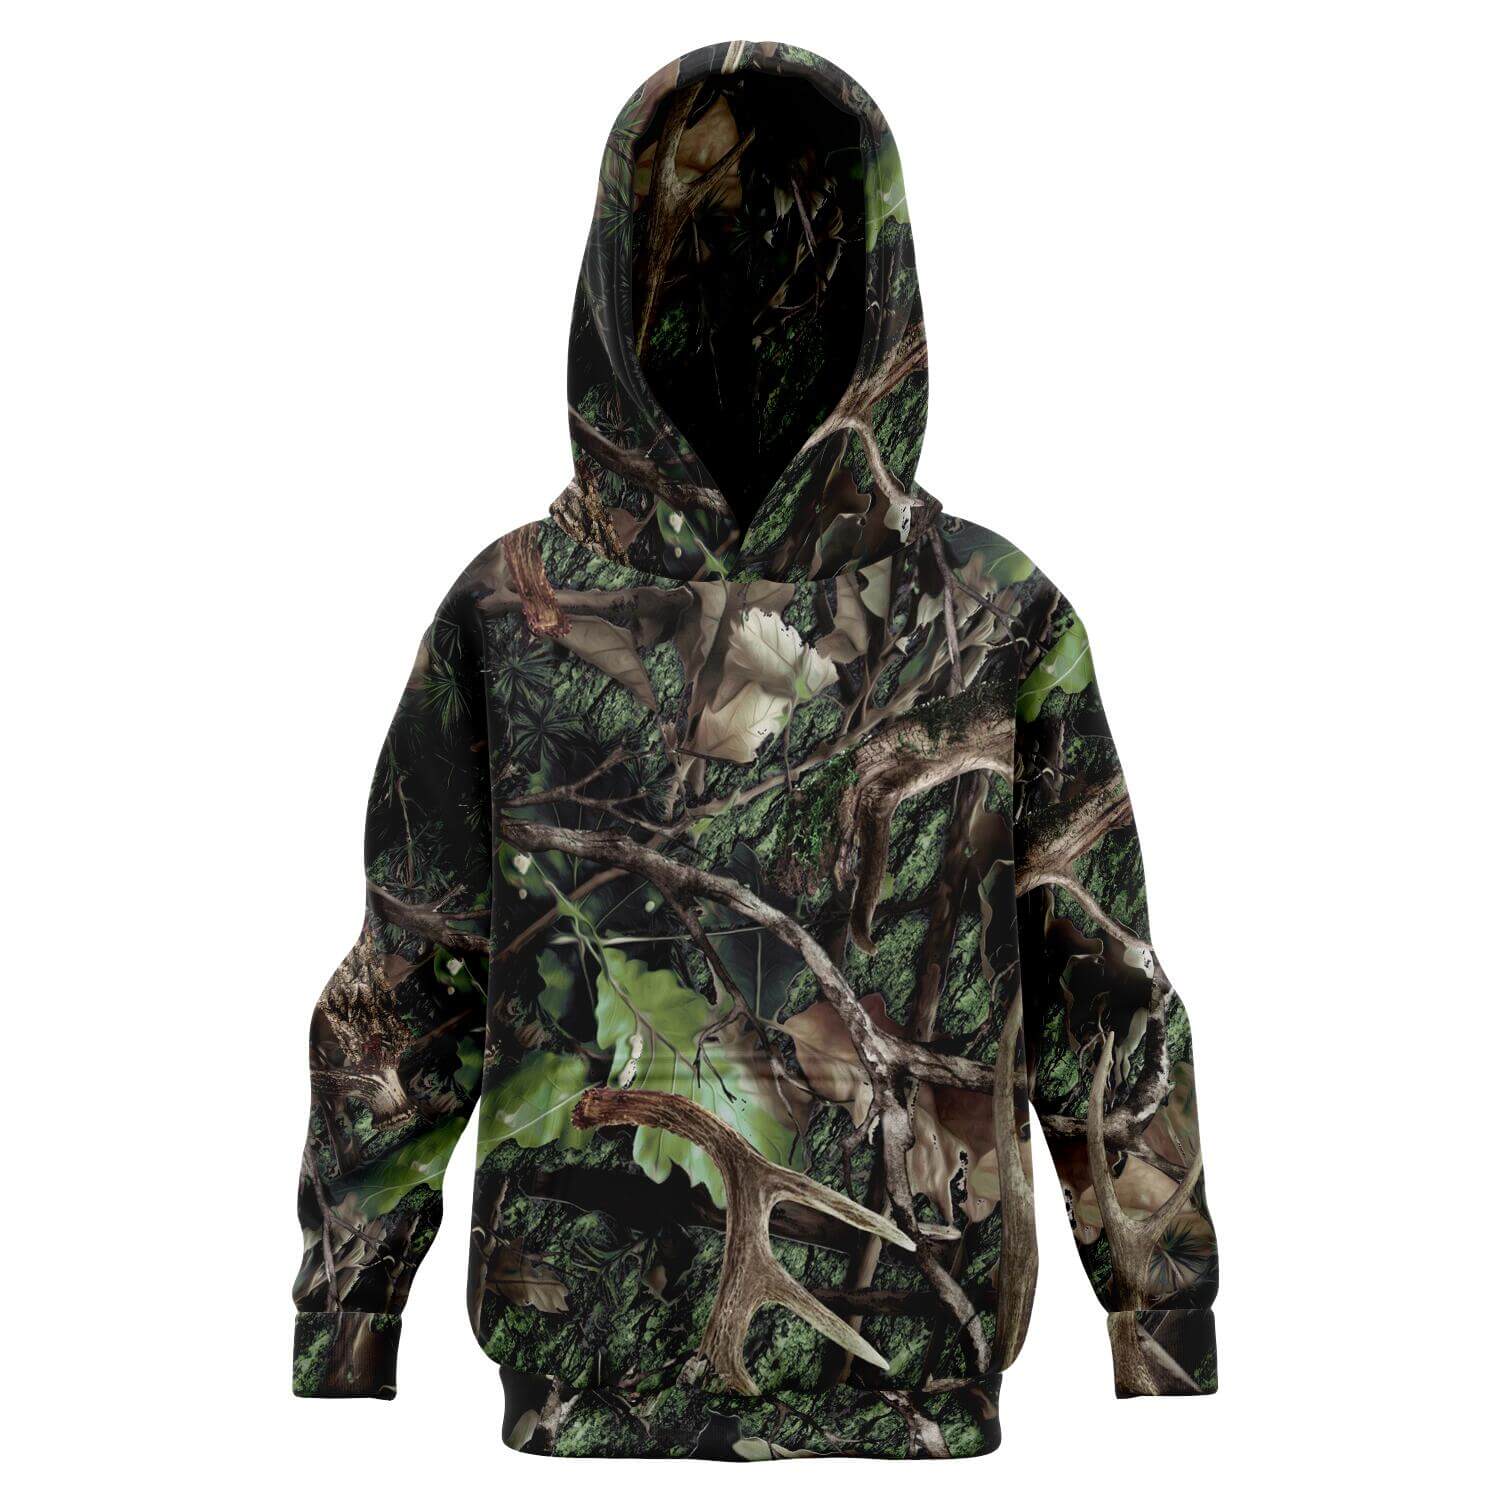 Kids Hoodie - Green Camouflage - front